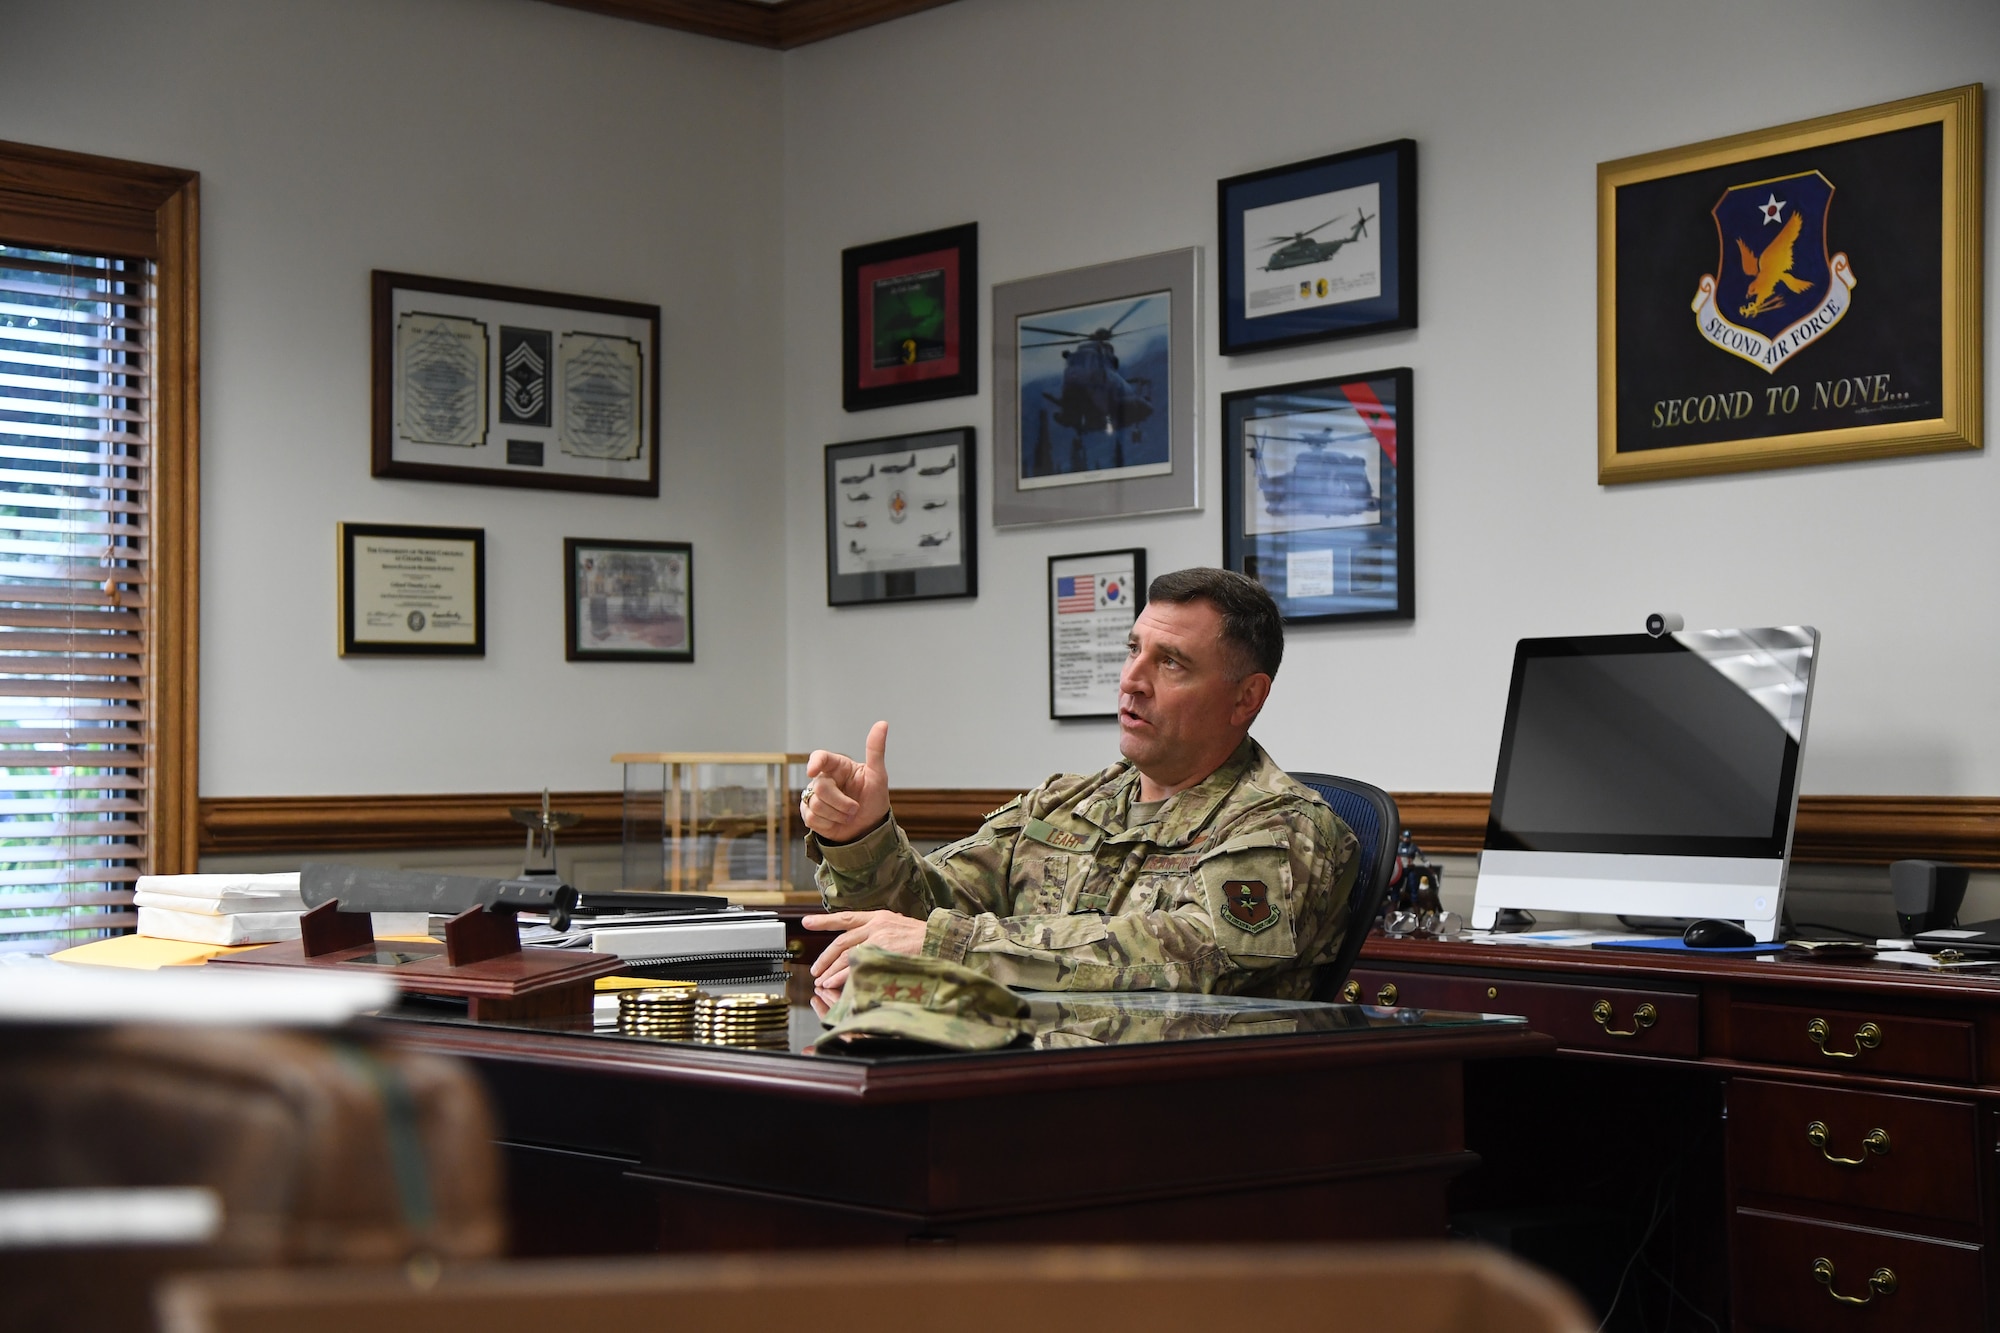 U.S. Air Force Maj. Gen. Timothy Leahy, Second Air Force commander, delivers remarks during an interview inside his office on Keesler Air Force Base, Mississippi, Aug. 14, 2019. Leahy will retire on Dec. 1 with more than 34 years of military service. Throughout his career, Leahy held positions at the major command, sub-unified combatant command and geographic and functional combatant command levels. He also commanded at the squadron, wing, center and numbered Air Force level. Additionally, Leahy is a command pilot with more than 3,200 hours of flight time, primarily in Special Operations Forces aircraft. (U.S. Air Force photo by Airman 1st Class Spencer Tobler)